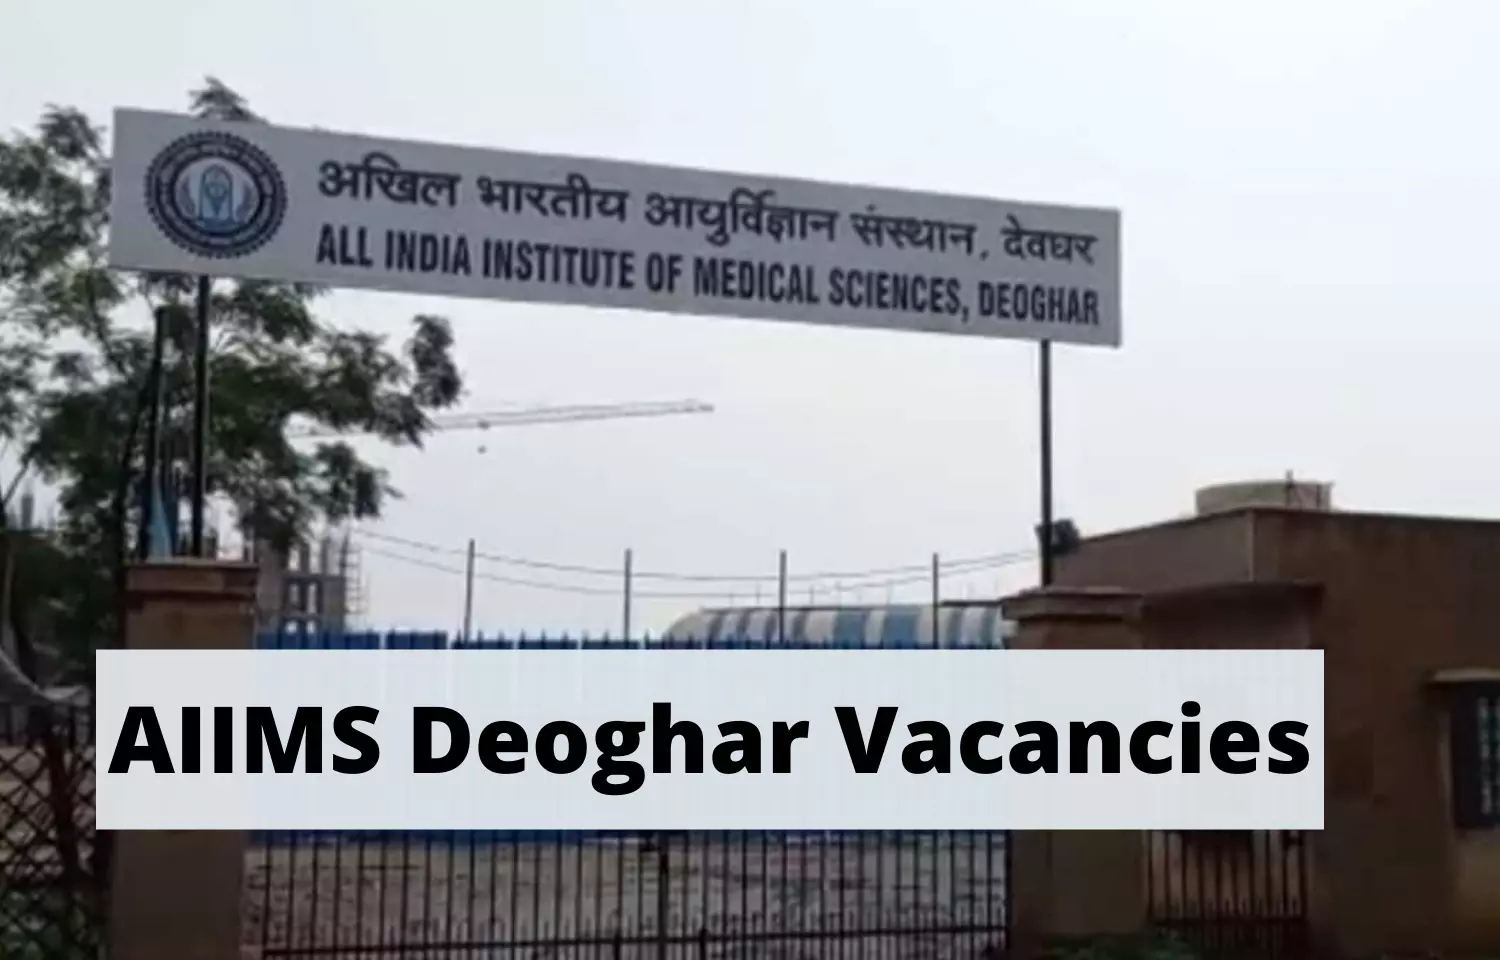 APPLY NOW At AIIMS Deoghar for 25 Vacancies For Junior Resident Post, Details